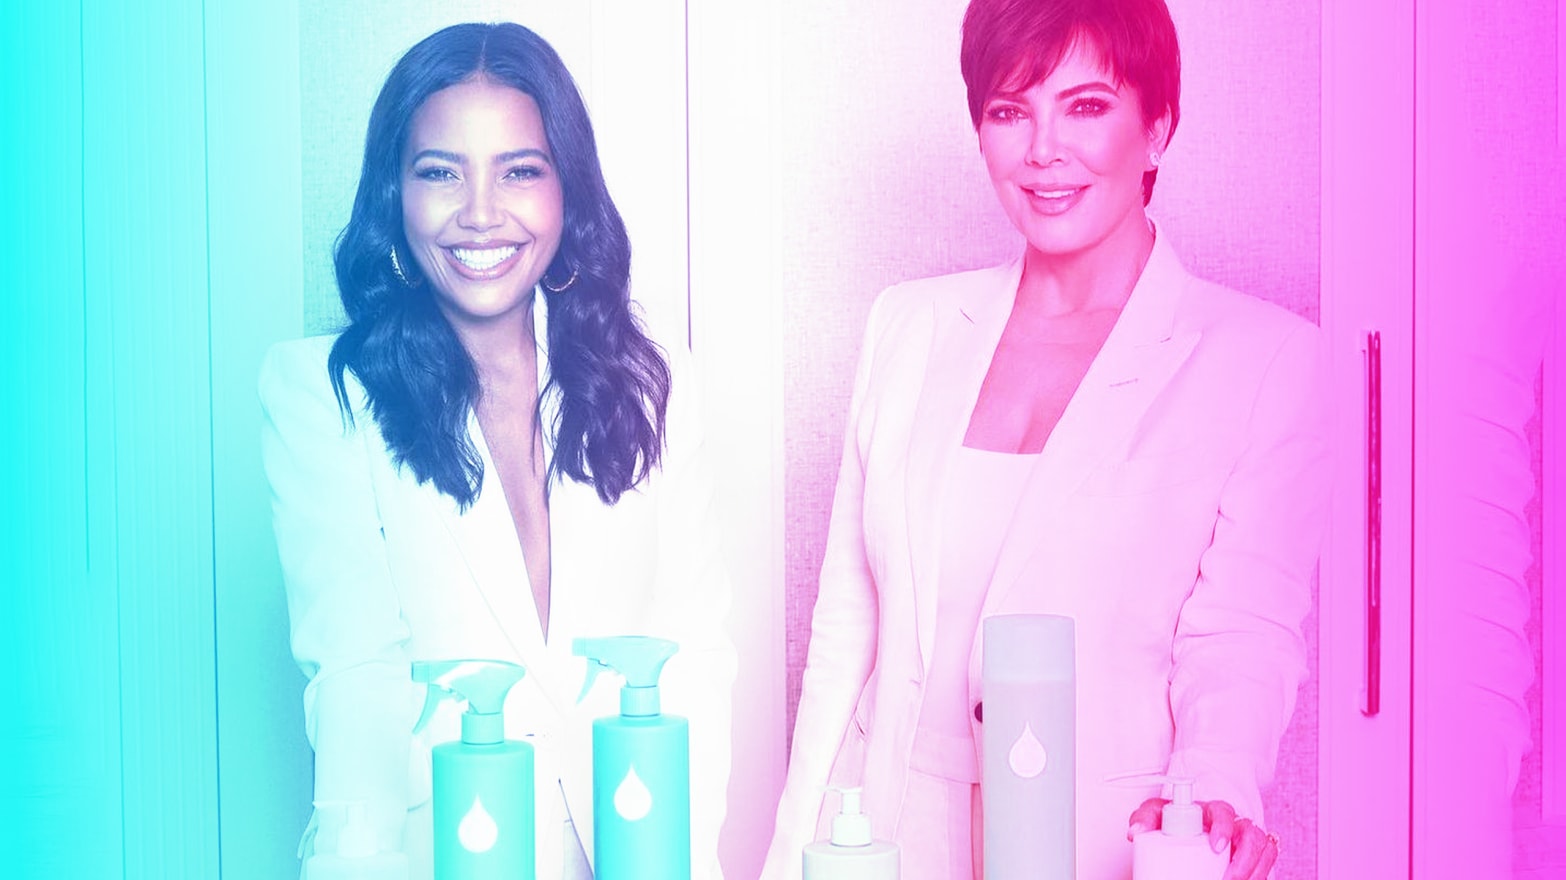 Kris Jenner Safely Cleaning Brand Review | Scouted, The Daily Beast